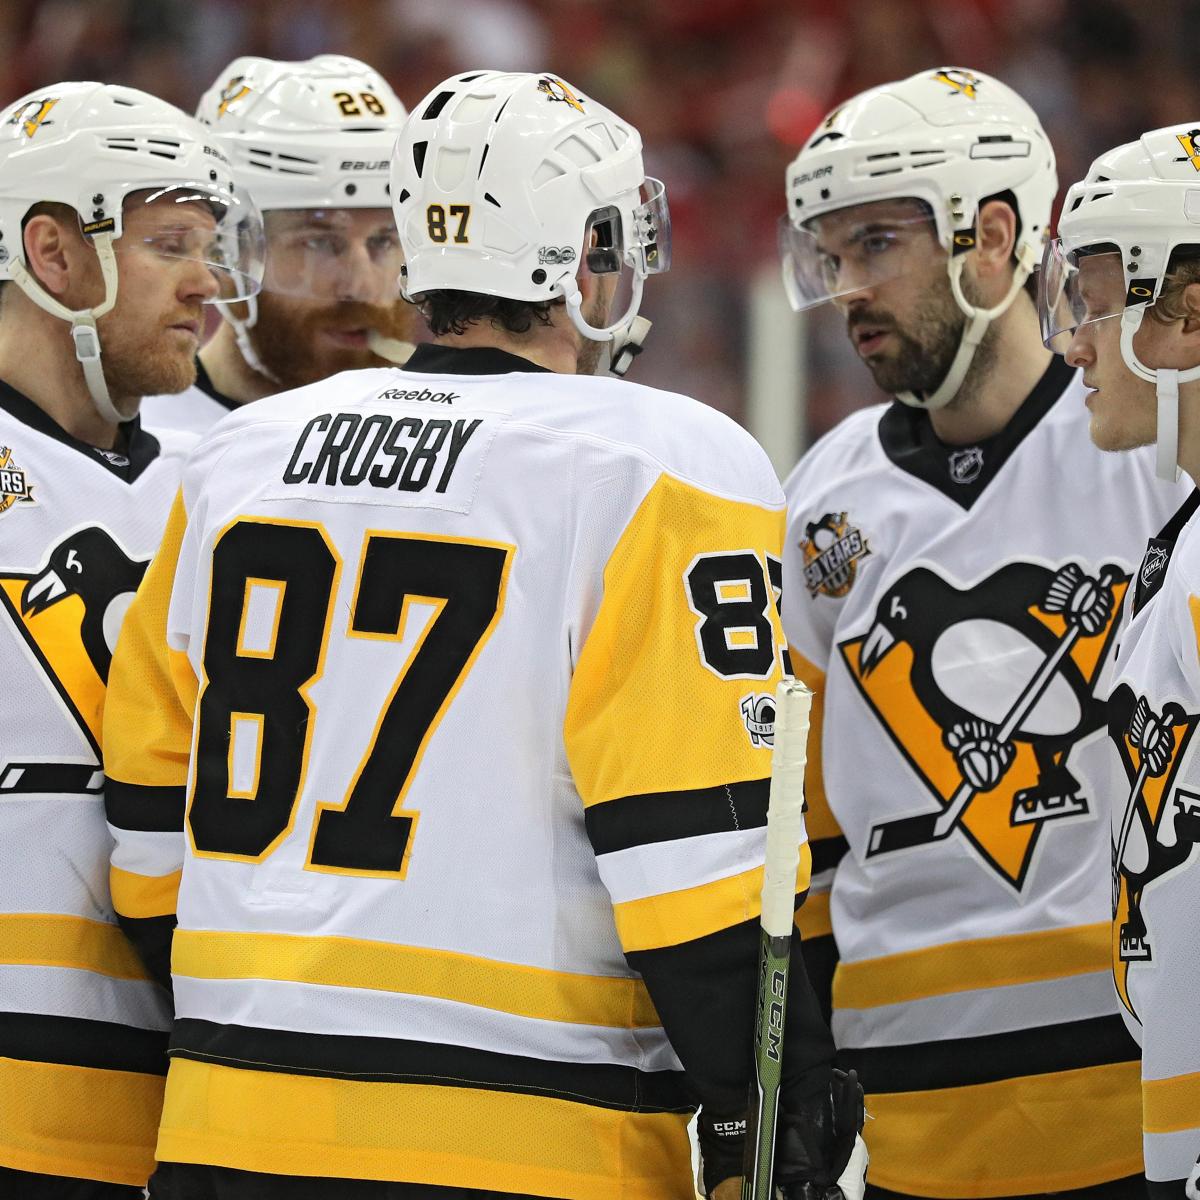 NBC Sports Hockey on X: Should the @penguins bring this jersey